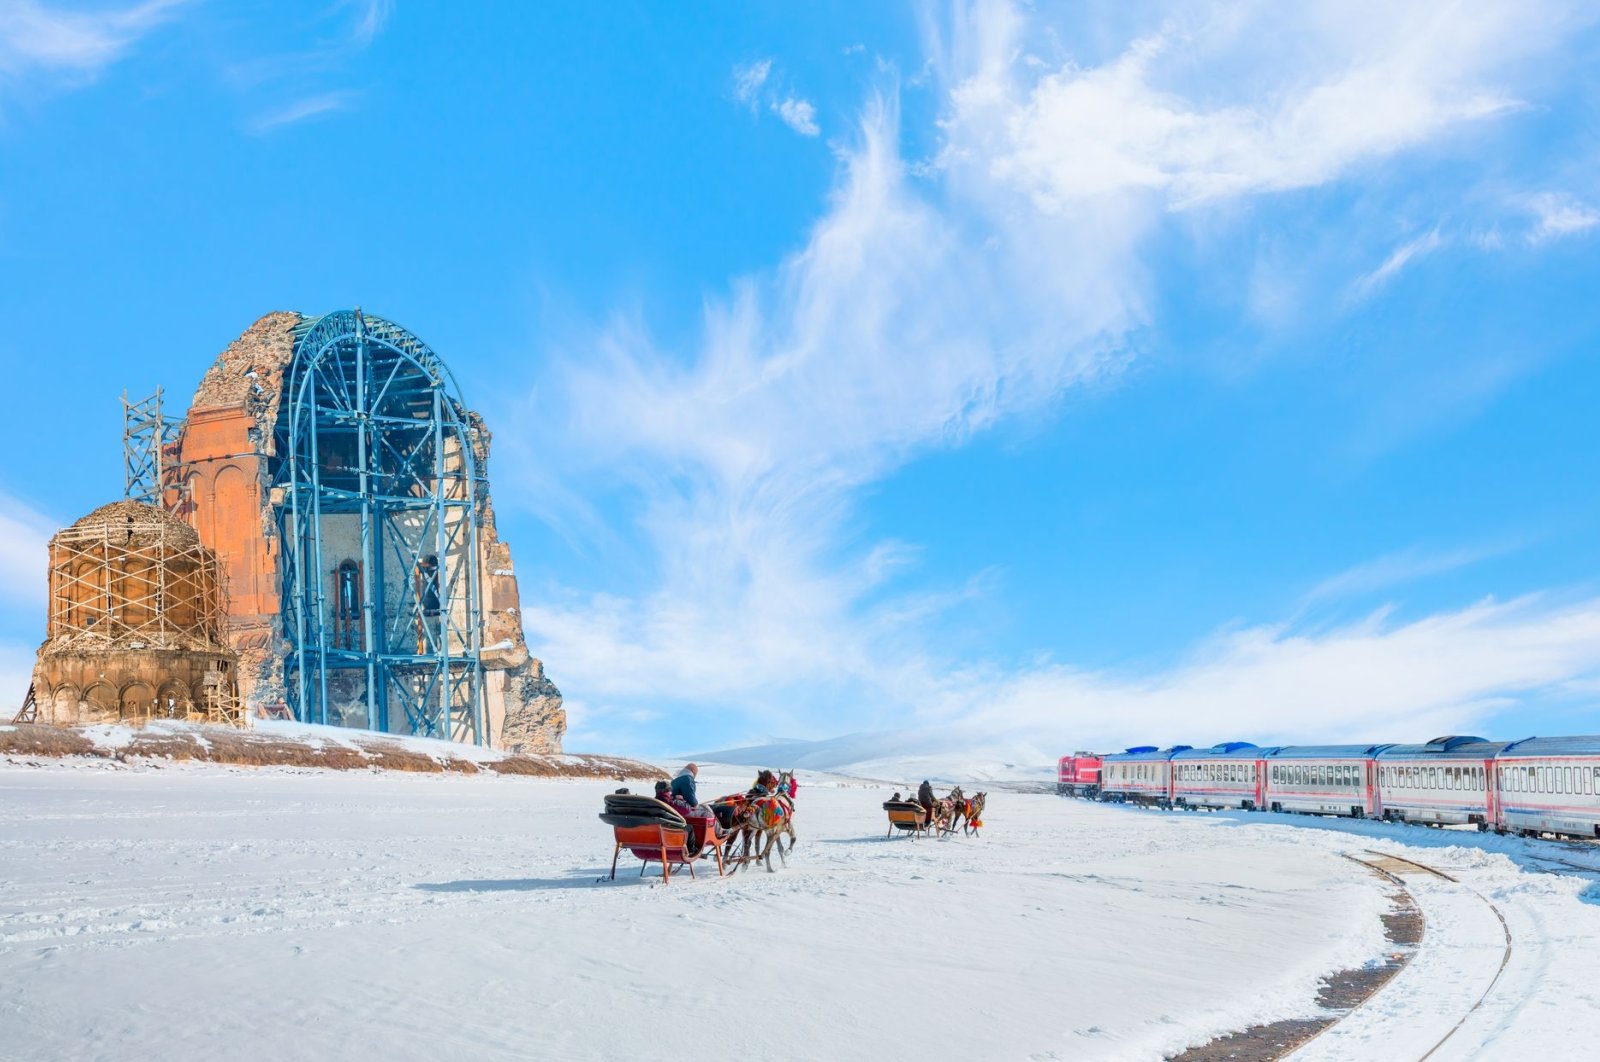 The Eastern Express train rides past the Ani ruins as horses pull a couple of sleighs on the snow, in Kars, Türkiye. (Shutterstock Photo)